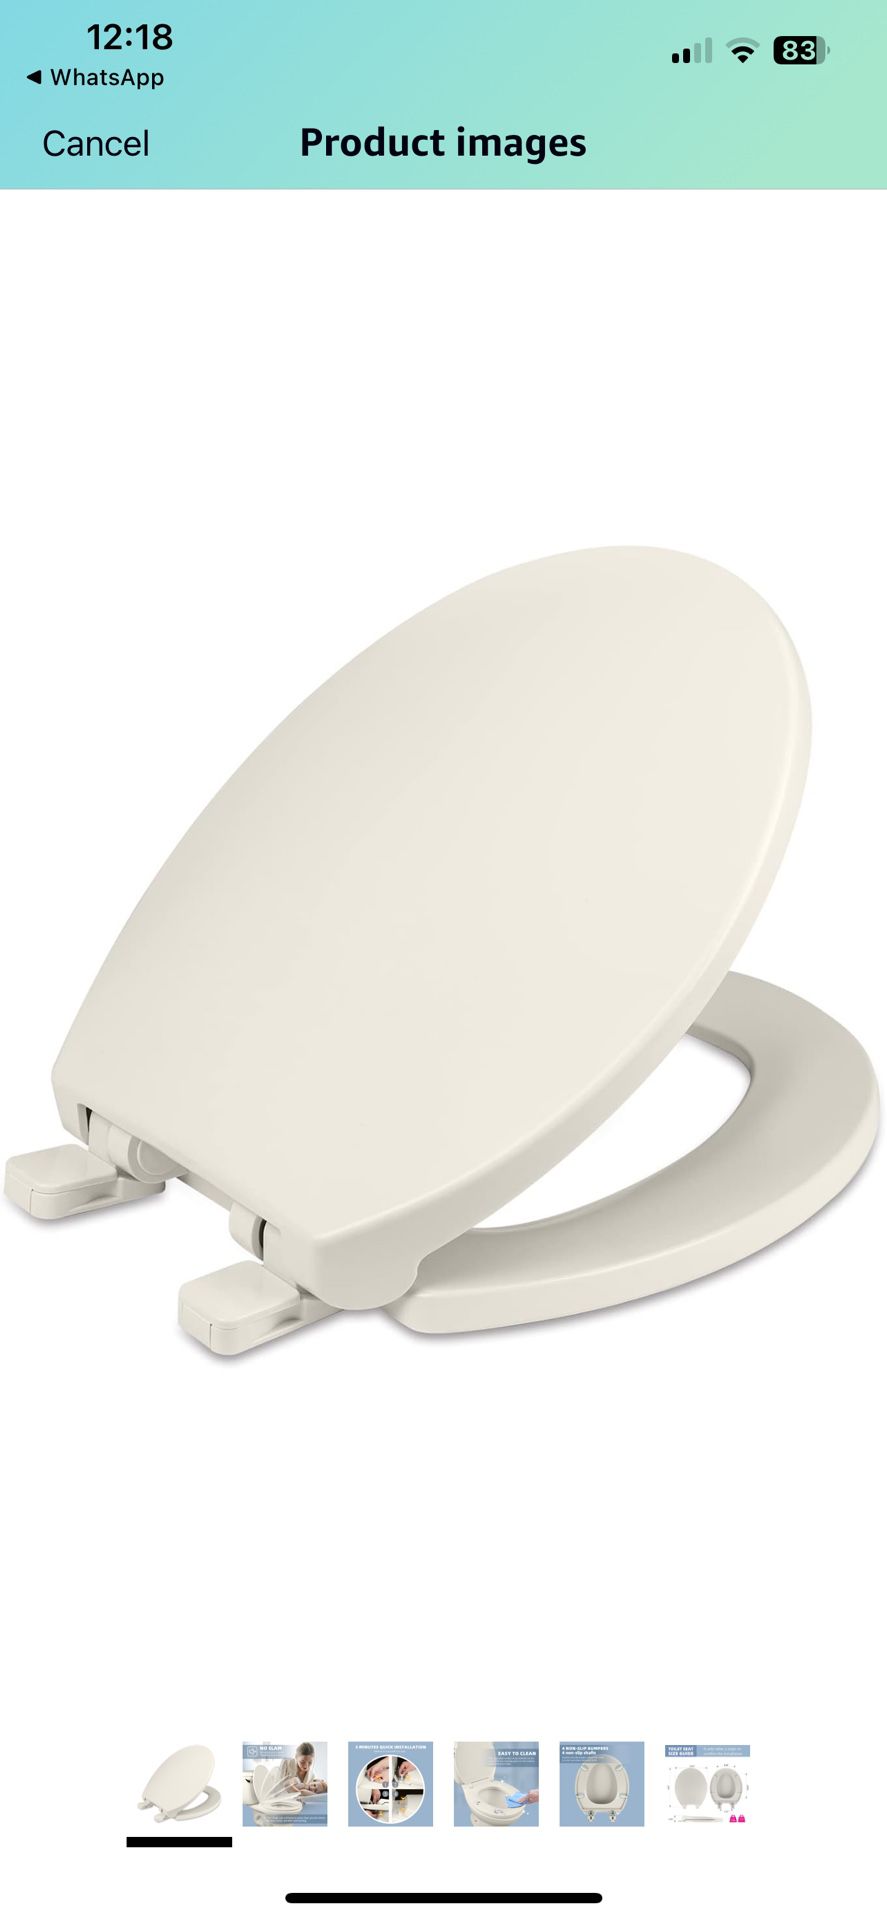 Round Toilet Seat, Slow Soft Quiet Close, Thicken Engineering Plastic, No Wiggle Never Loosen,Easy To Install And Clean, Fits All America Standard Toi